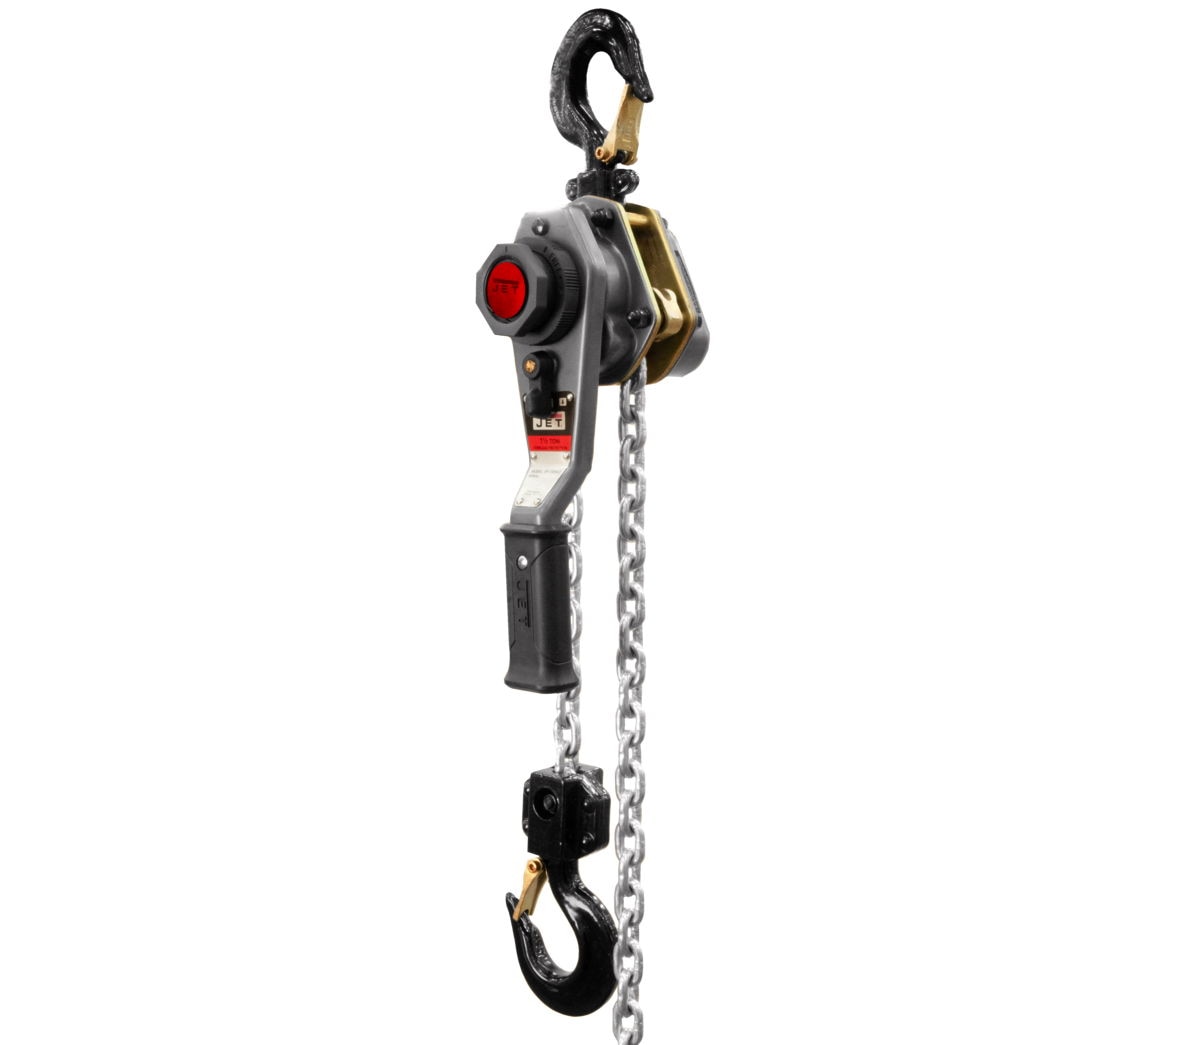 JLH-150WO-10, 1-1/2 Ton, Lever Hoist with 10' Lift with Overload Protection